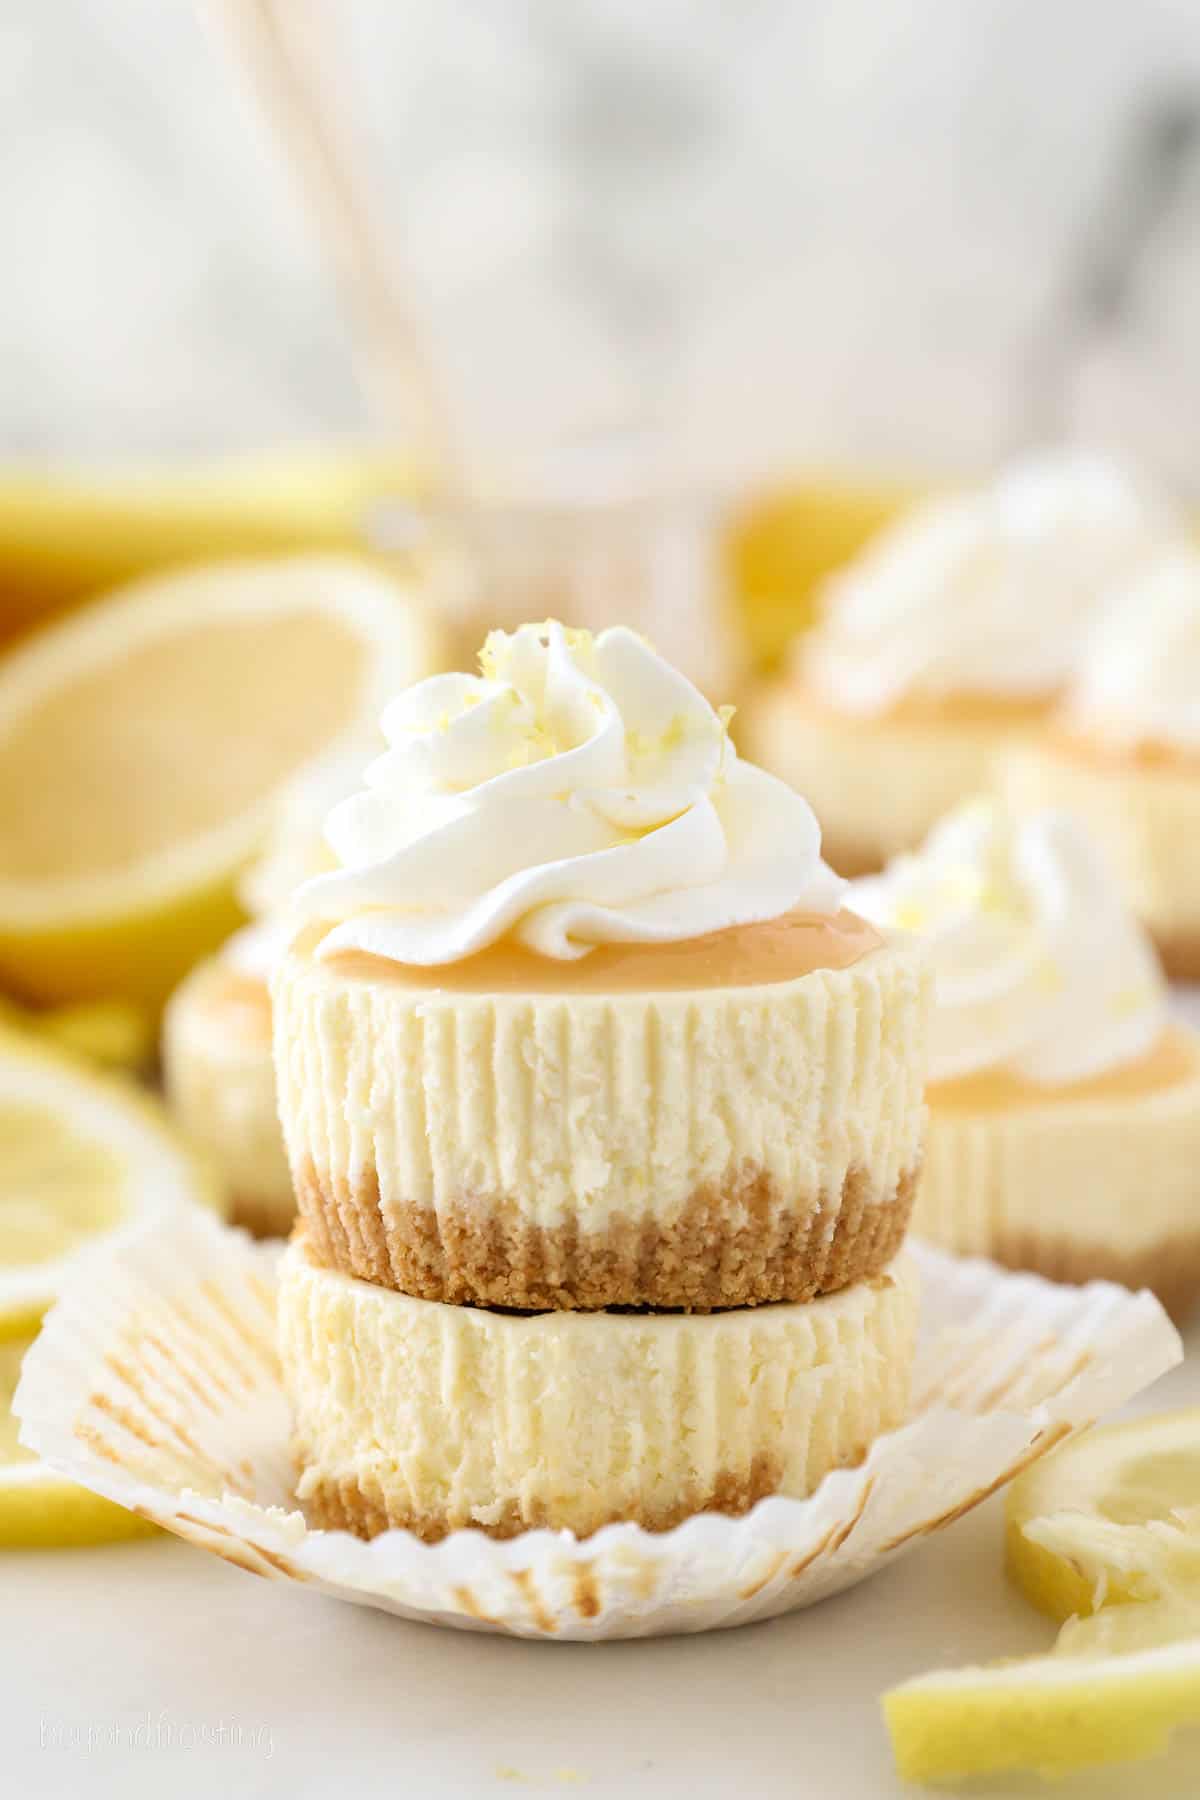 Two mini lemon cheesecakes stacked on top of one another, with a swirl of whipped cream on the top cheesecake.